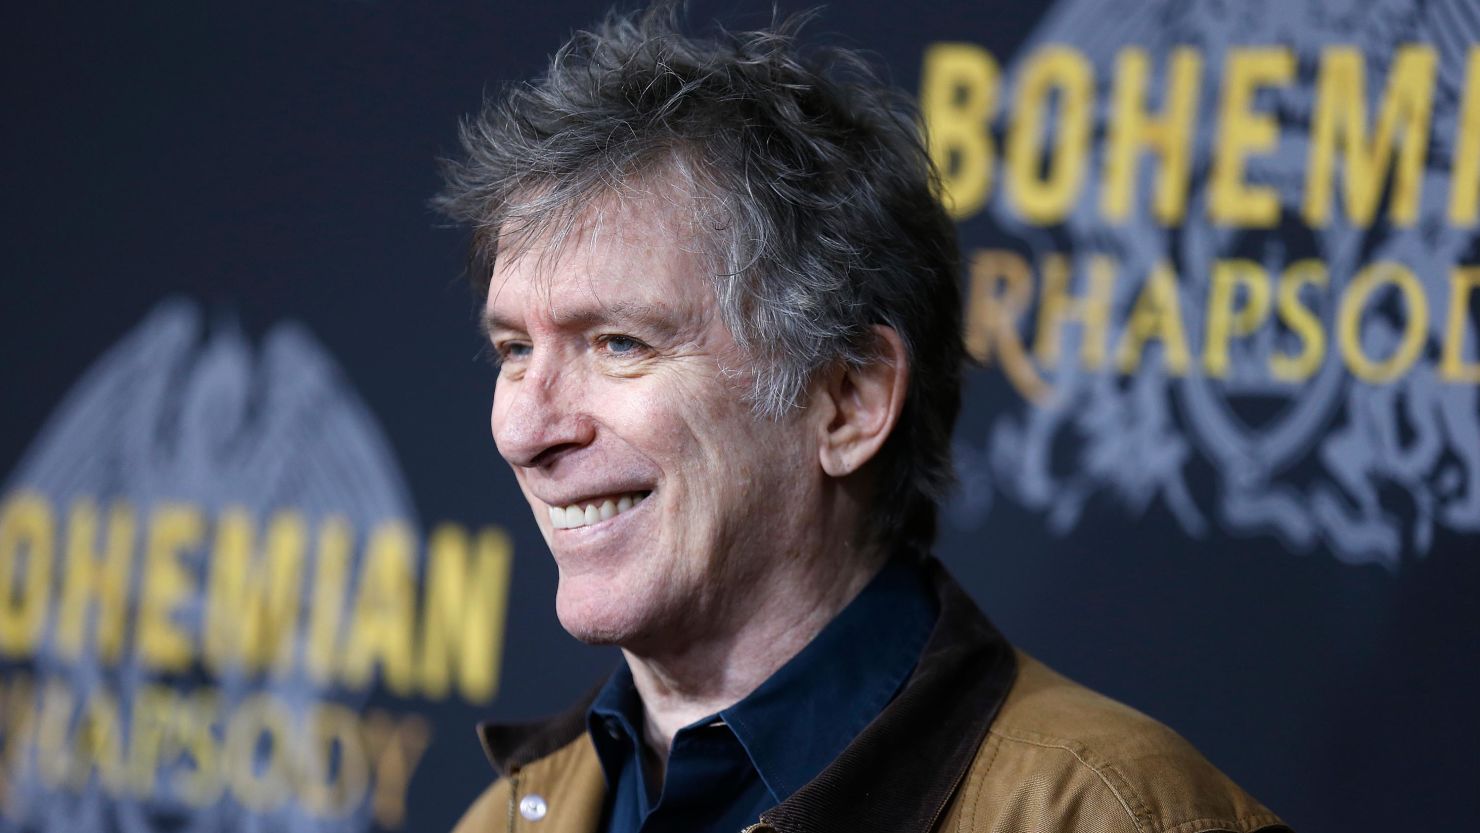 Kurt Loder attends the New York premiere of  "Bohemian Rhapsody" at The Paris Theatre in New York City in October 2018. 